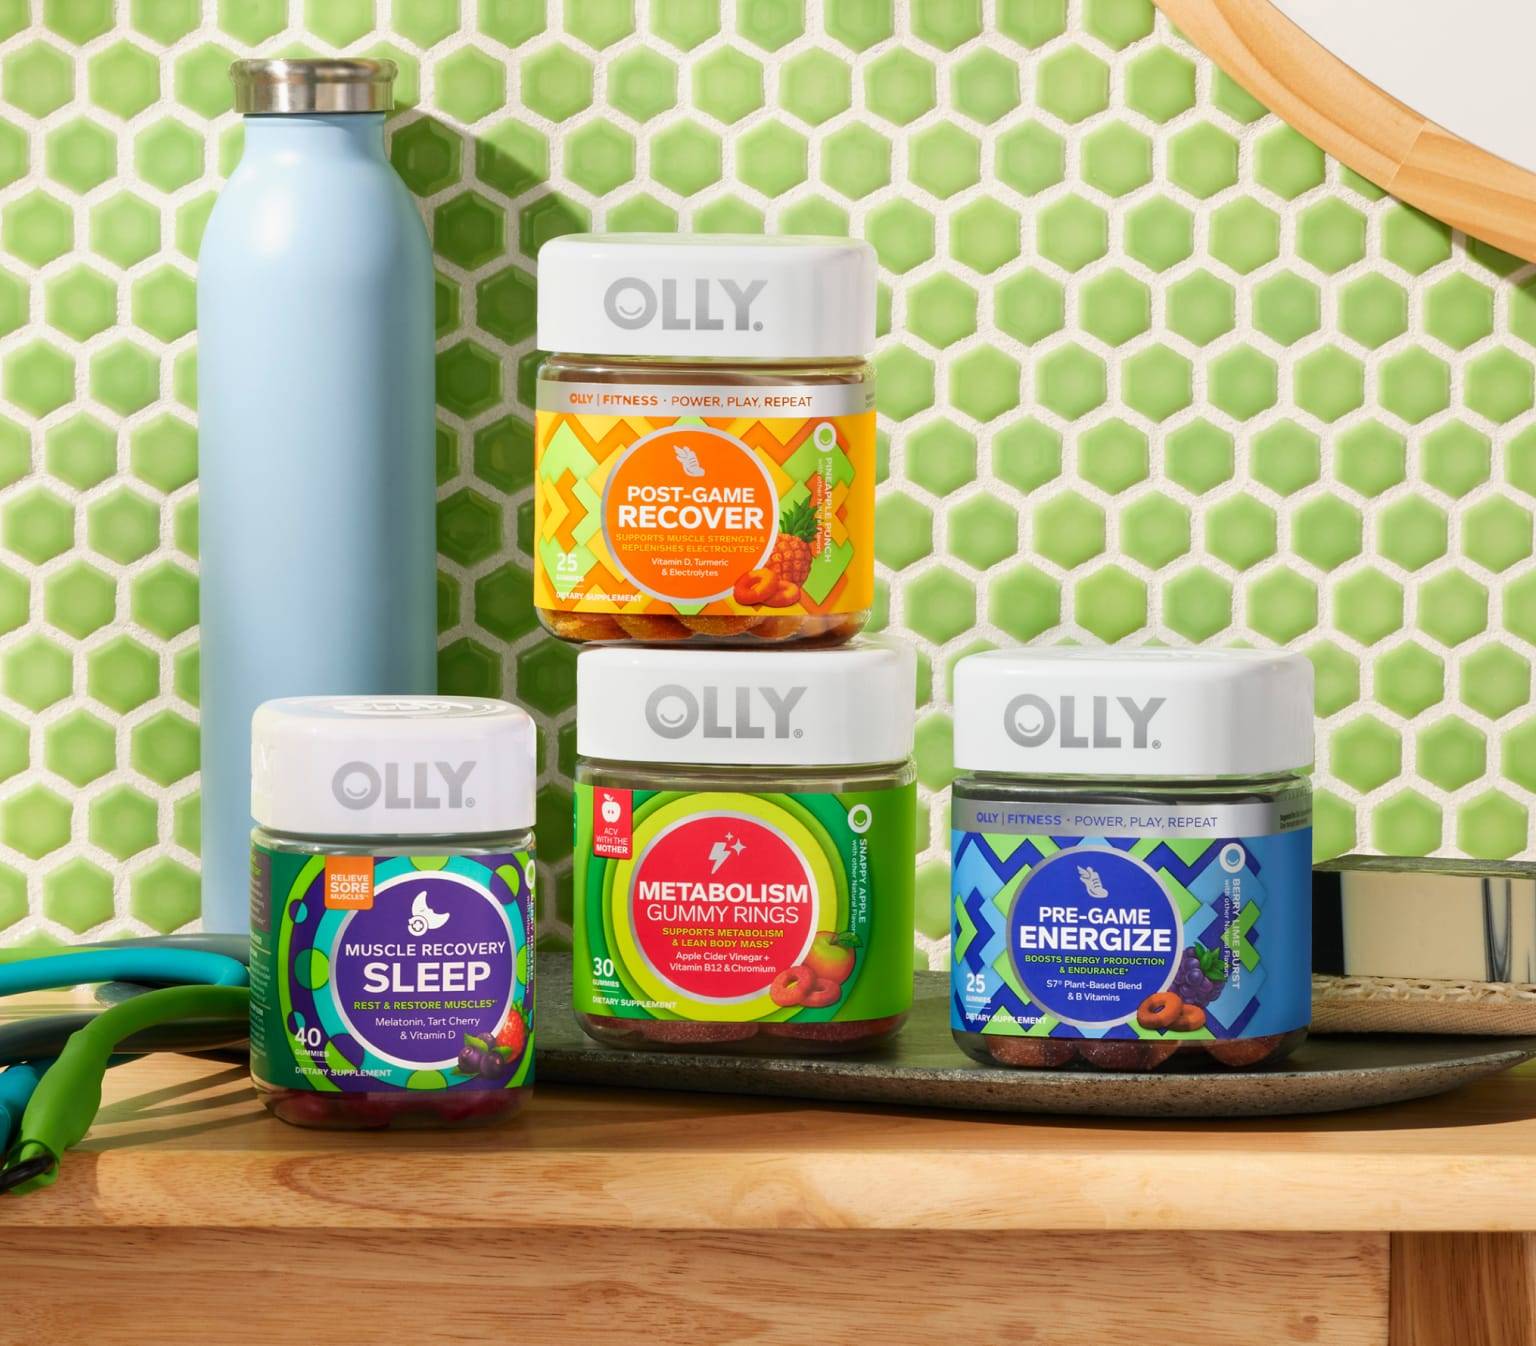 OLLY Fitness Products